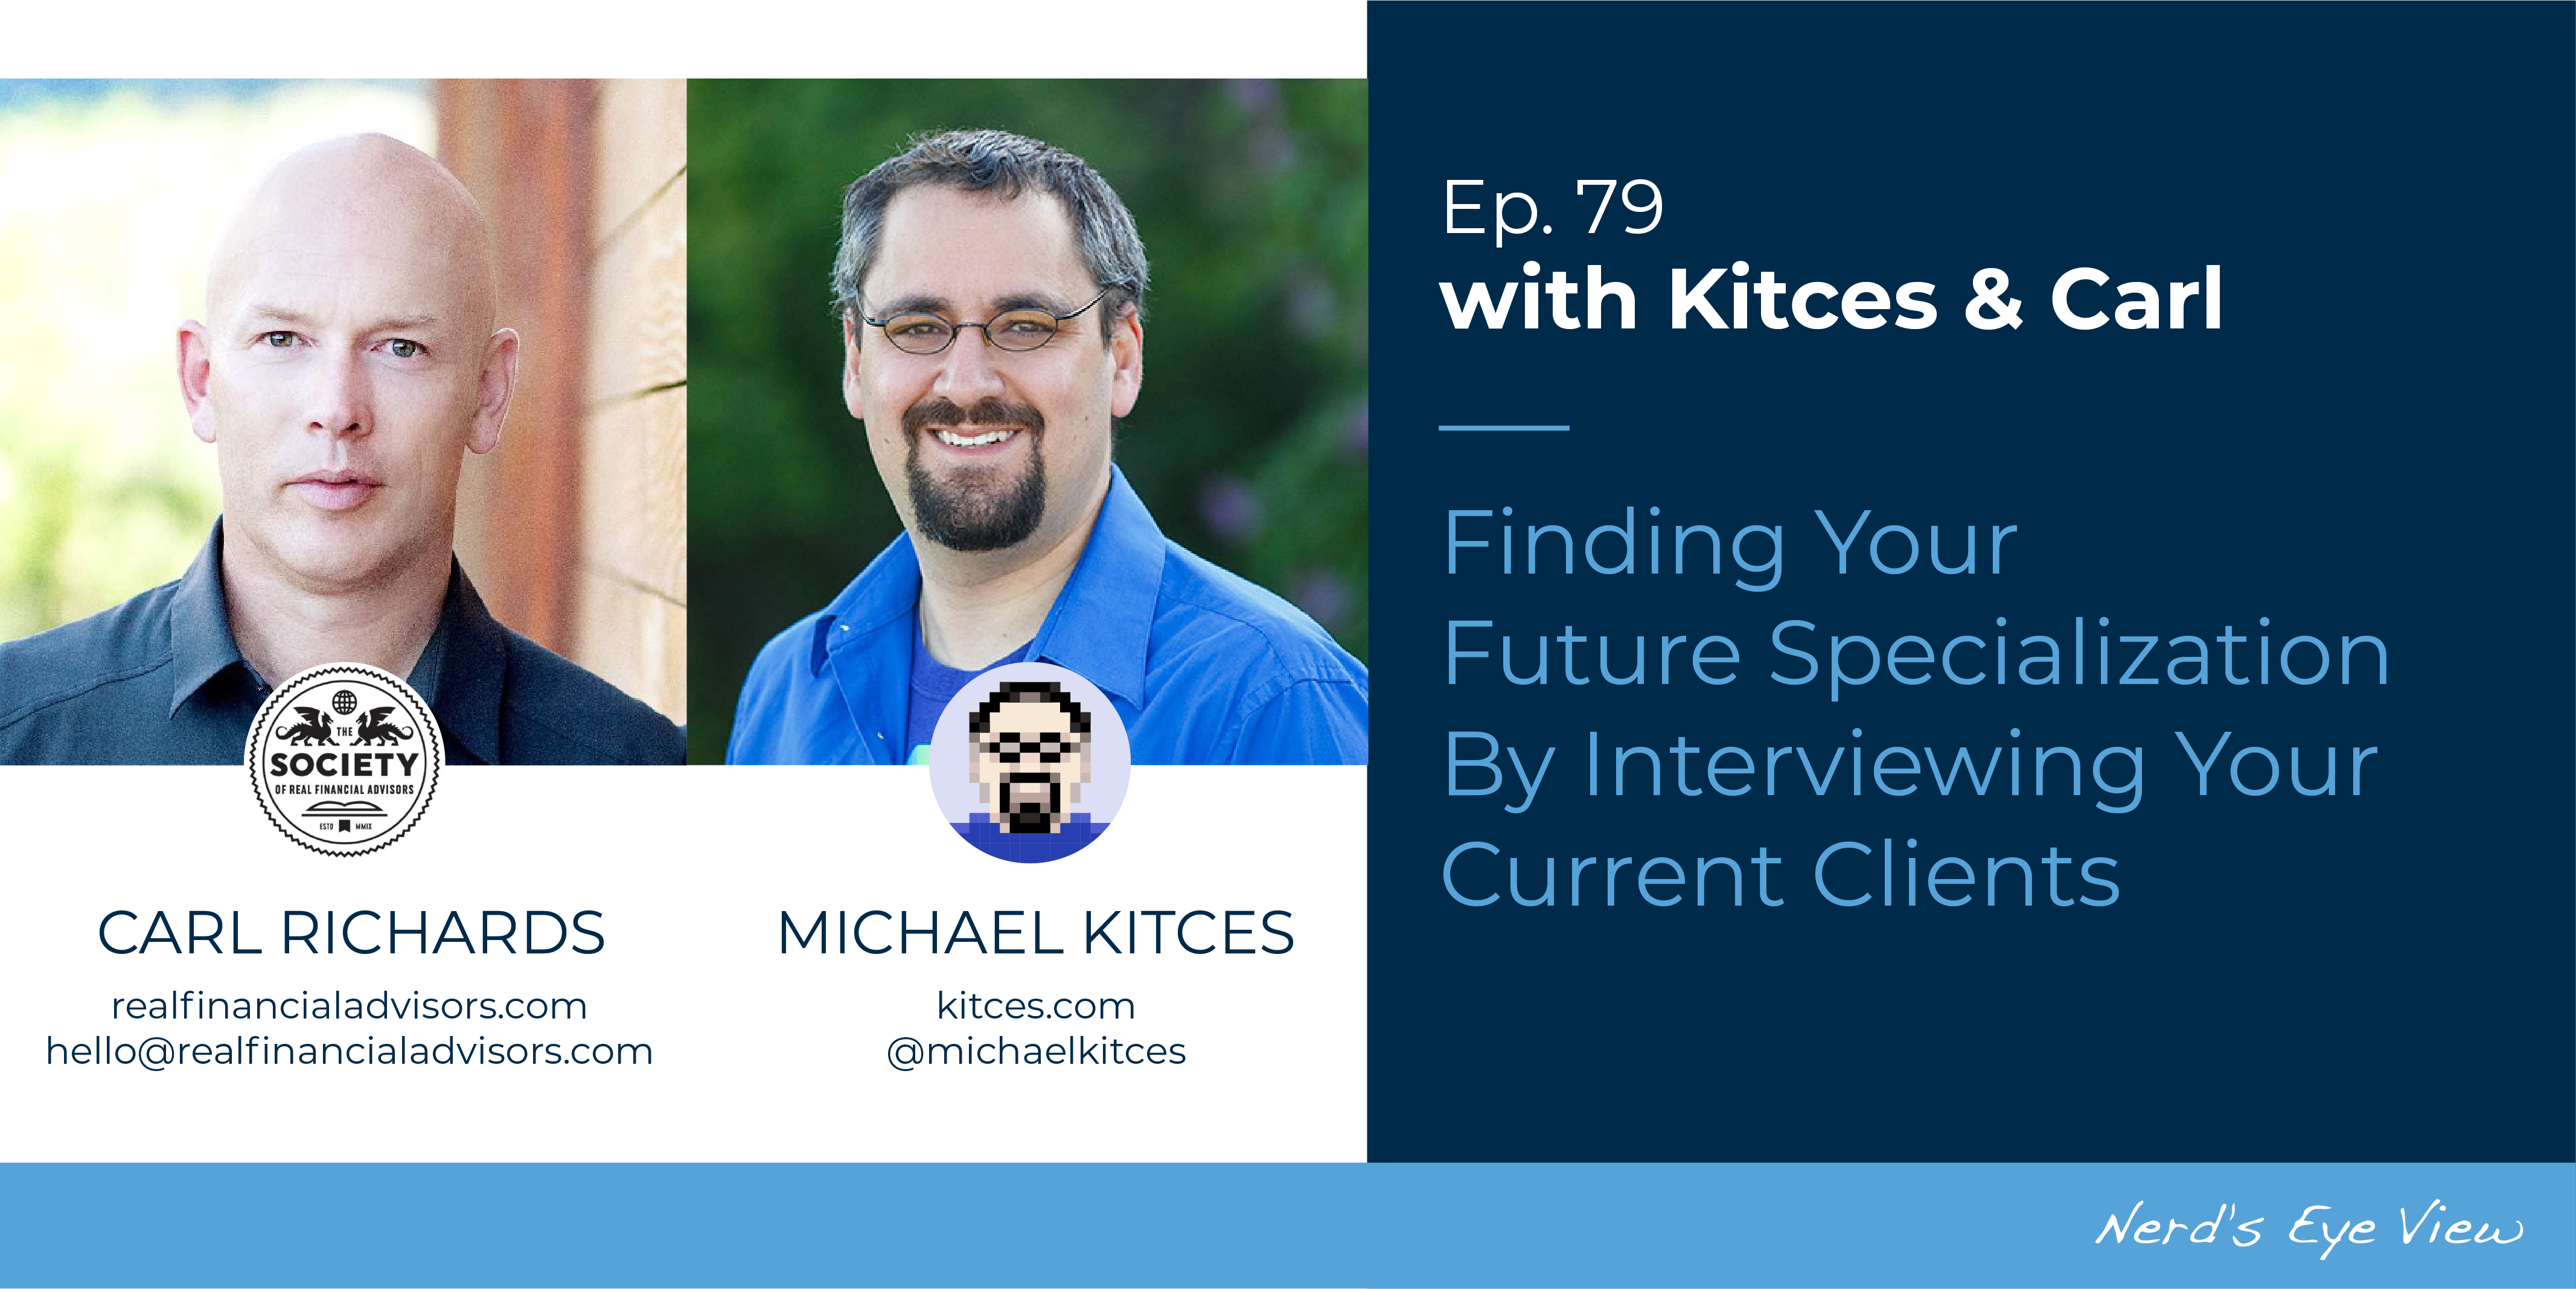 Kitces Carl Ep 79 Finding Your Future Specialization By Interviewing Your Current Clients Social Image